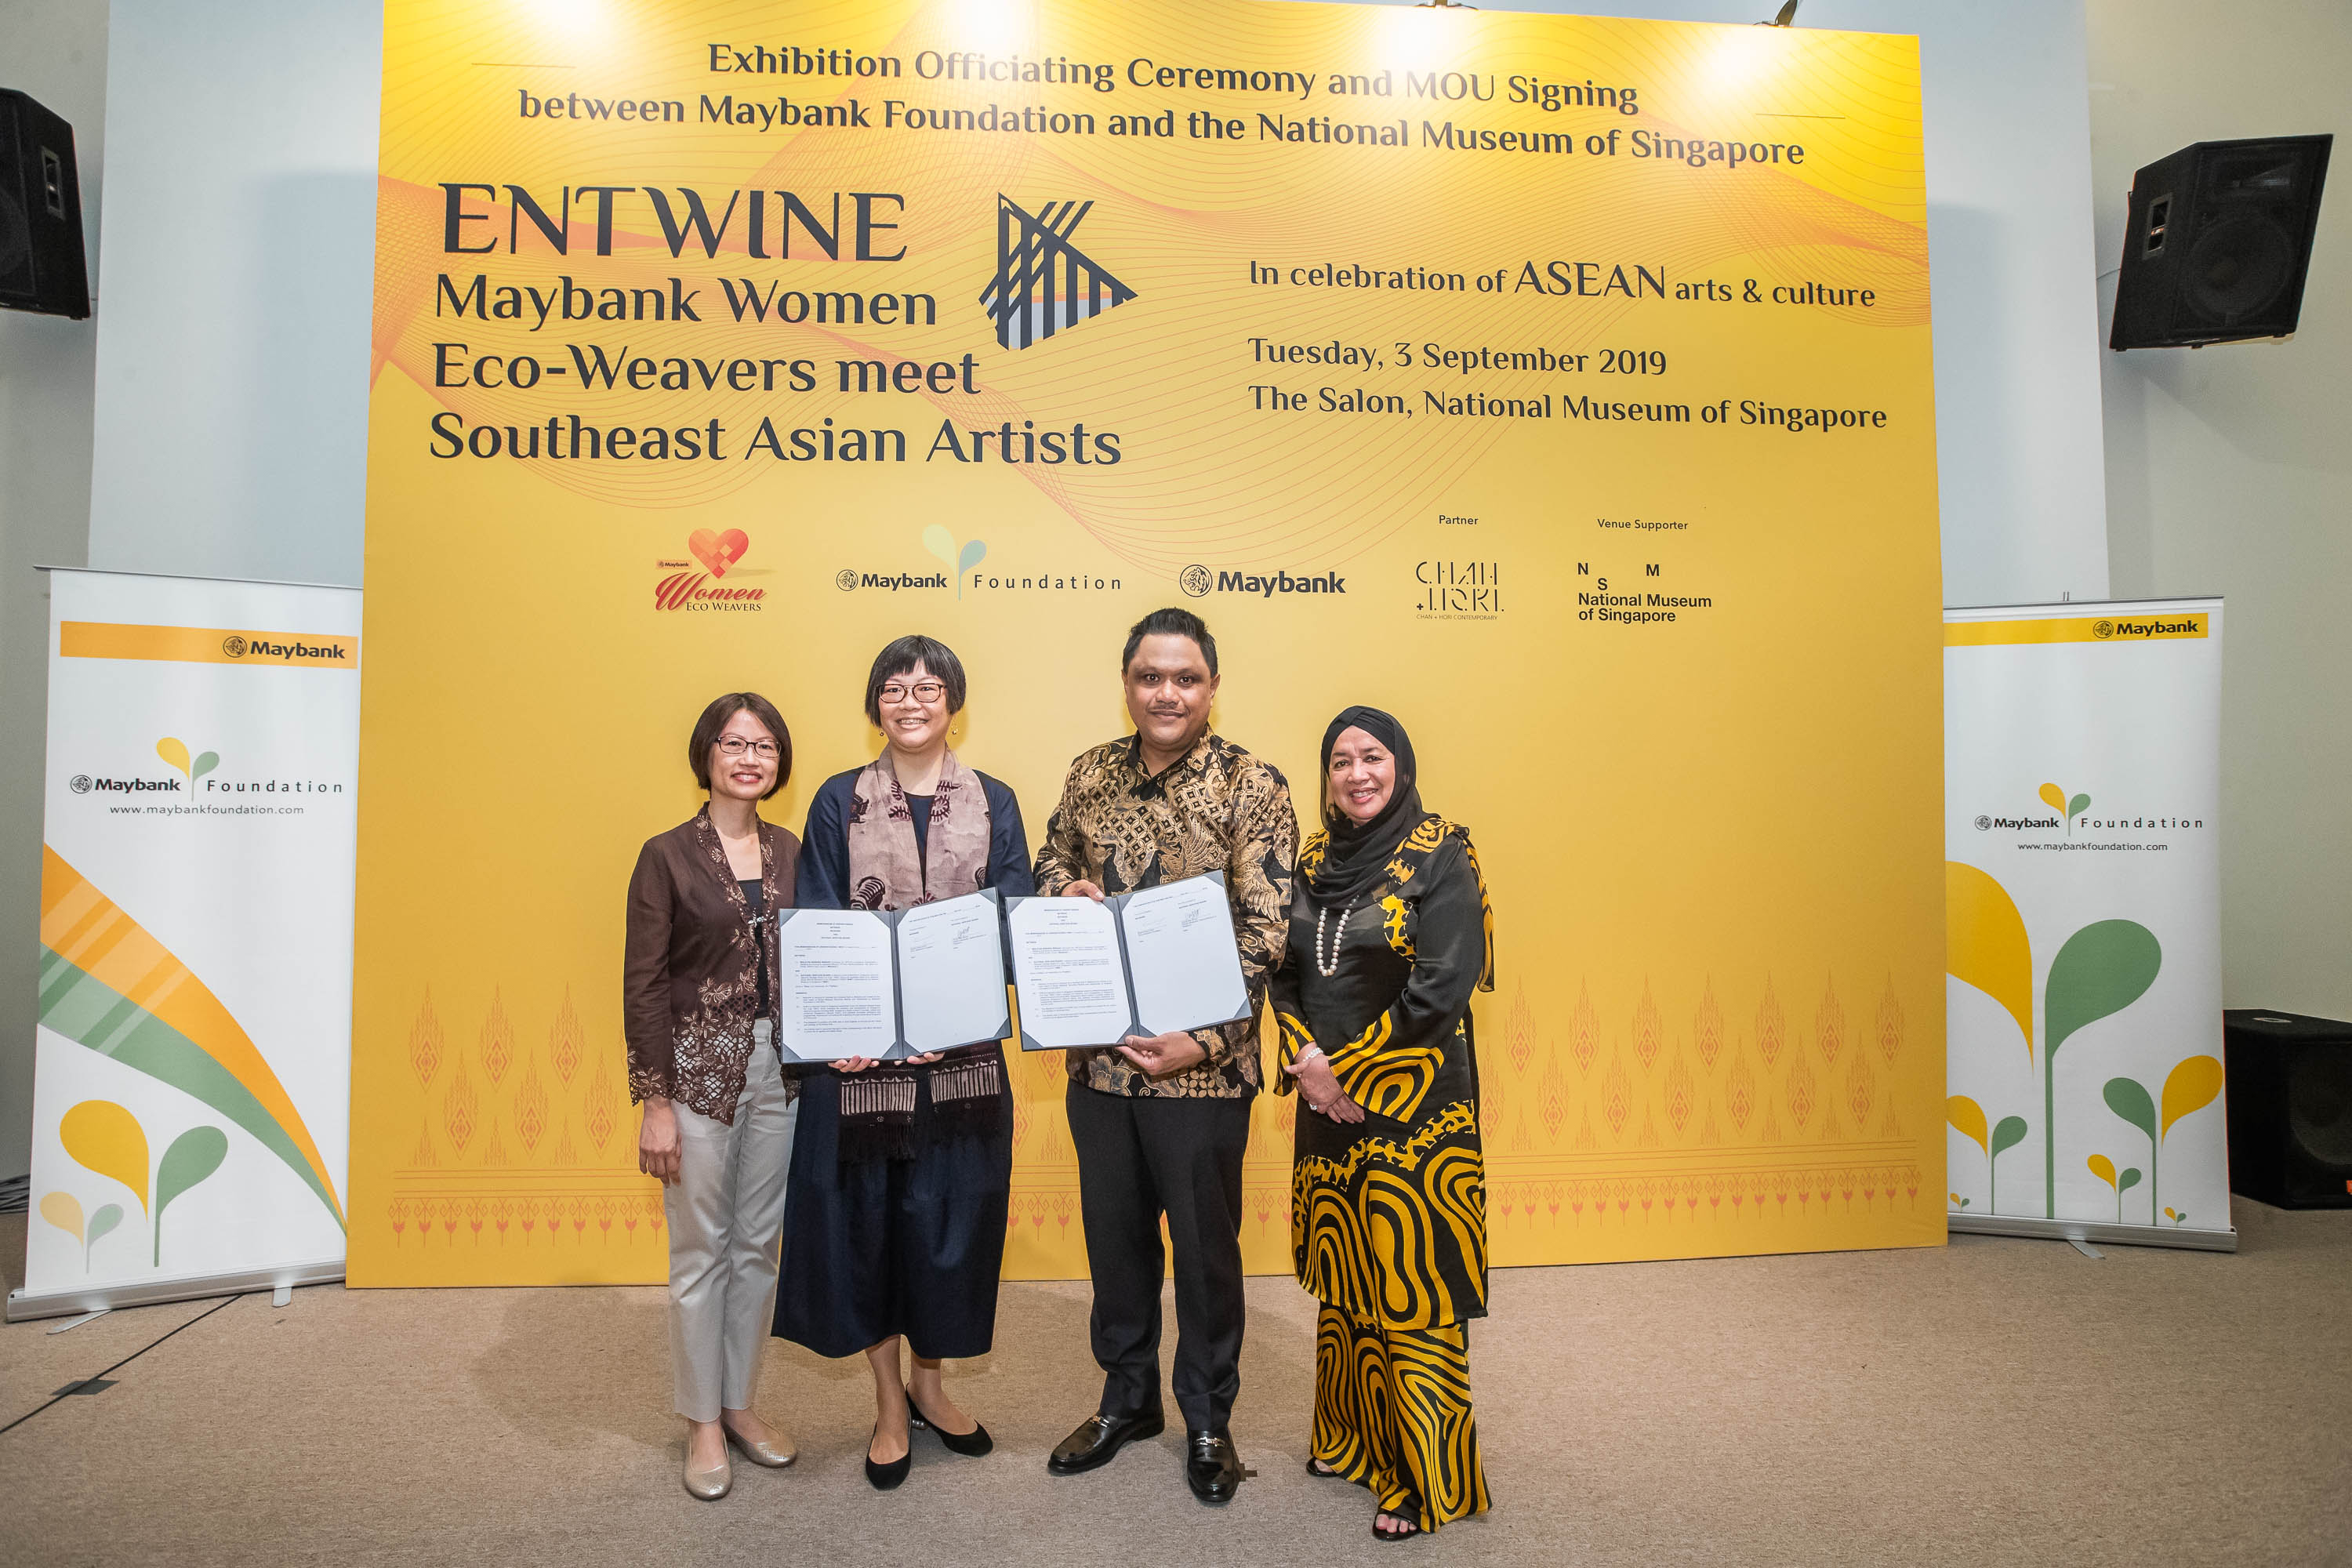 From left: Ms Jennifer Chan, Deputy Chief Executive of NHB; Ms Chung May Khuen, Director-Designate for National Museum of Singapore; Shahril Azuar Jimin, CEO of Maybank Foundation and Datuk Mohaiyani Shamsudin, Chairman of Maybank & Maybank Foundation after the MOU signing.